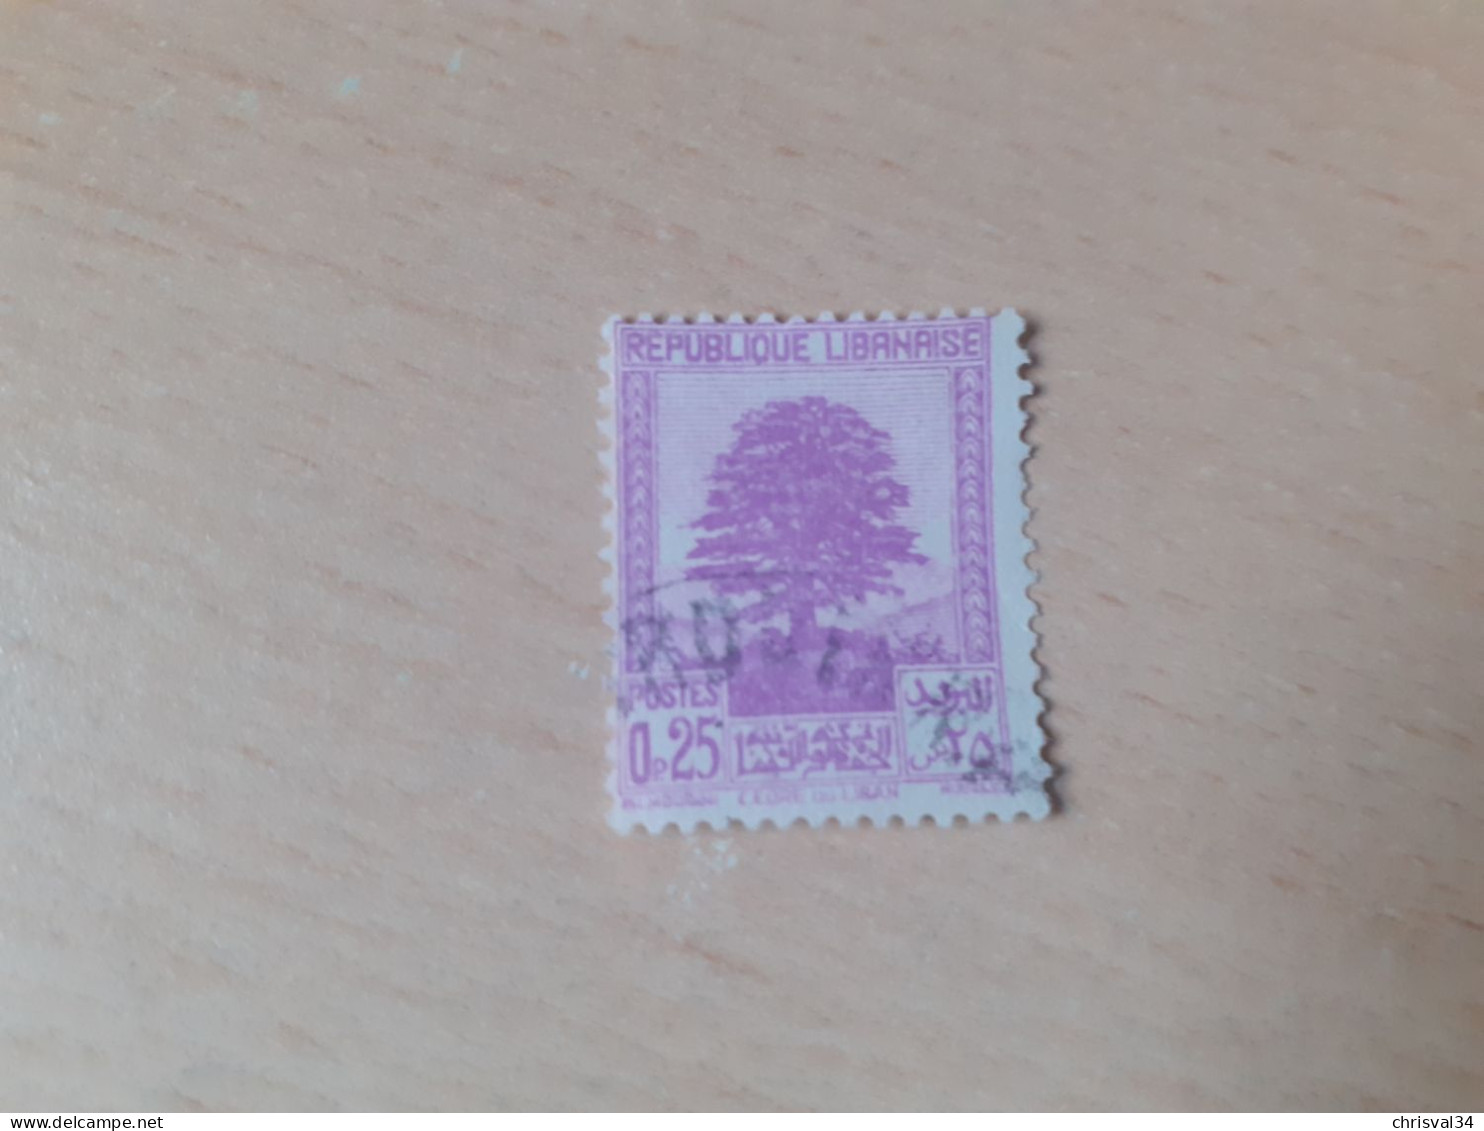 TIMBRE   GRAND  LIBAN       N  168      COTE  0,25  EUROS    OBLITERE - Used Stamps